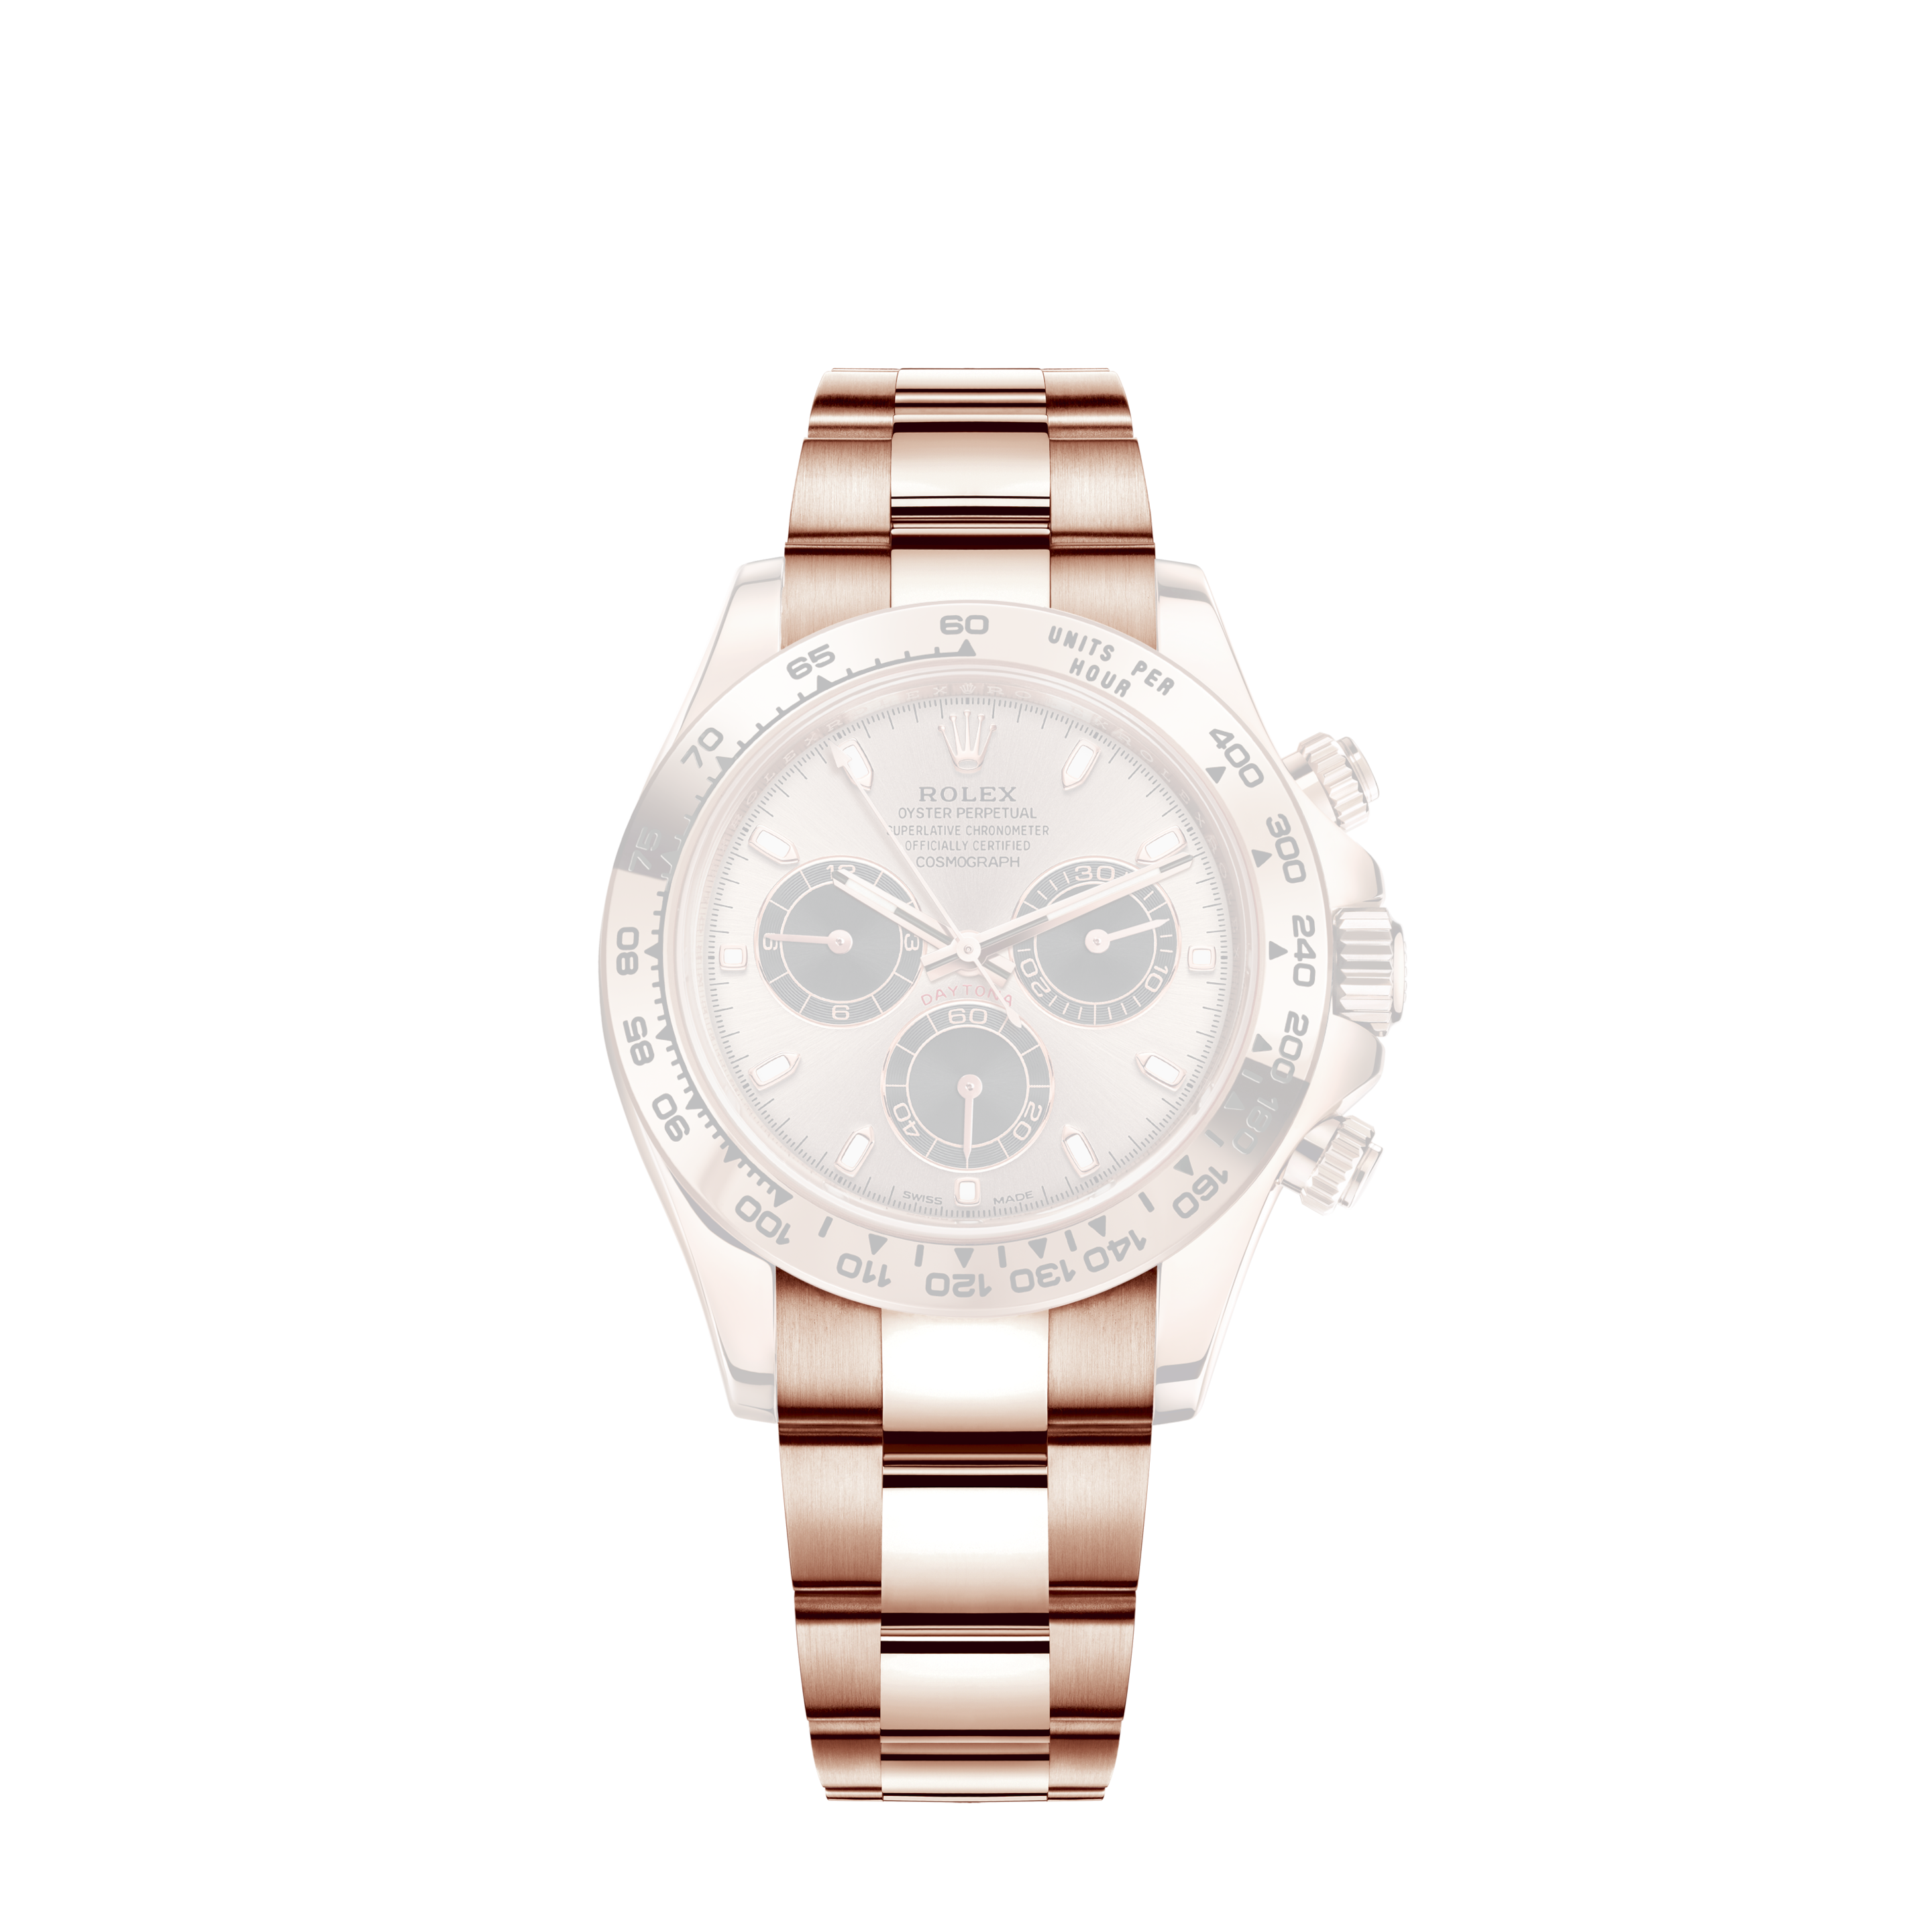 Rolex Oyster Perpetual Yacht-Master Ref. 168623Rolex Women's Customized Rolex watch 31mm Datejust Stainless Steel White MOP Mother of Pearl Diamond Dia